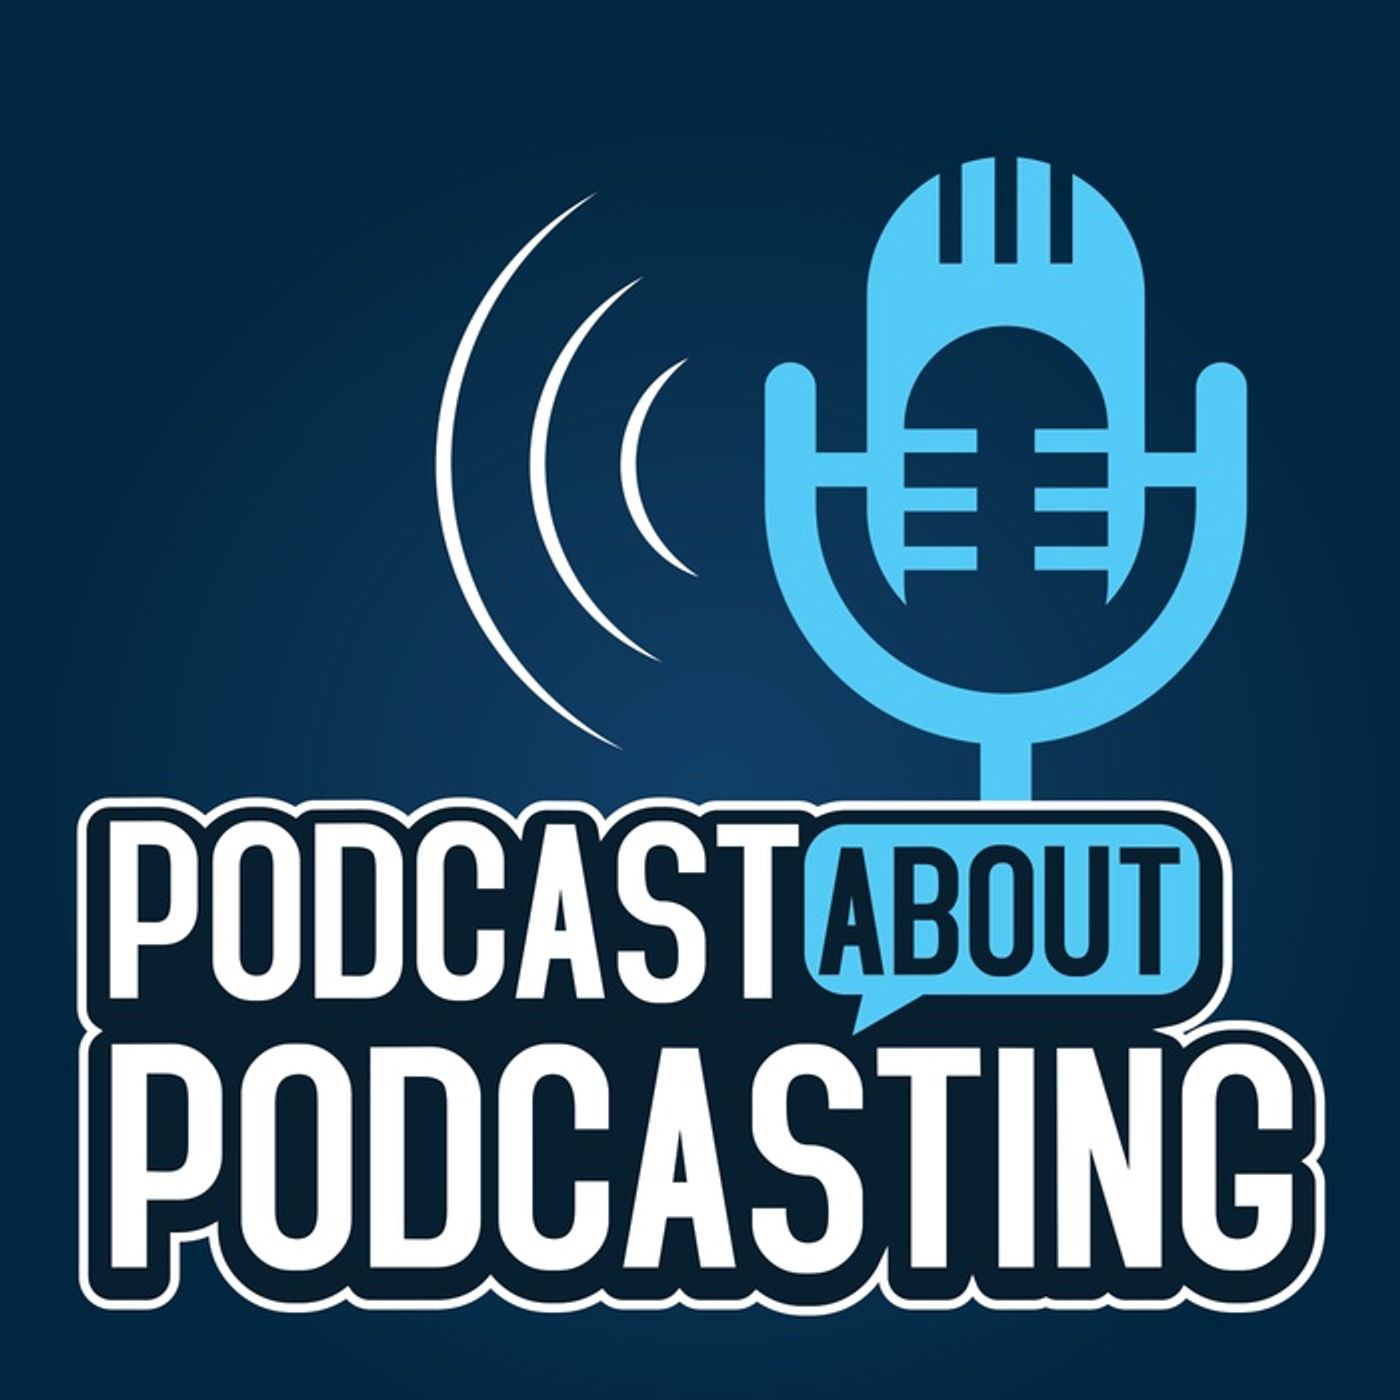 What is Podcasting and How Can it Help?